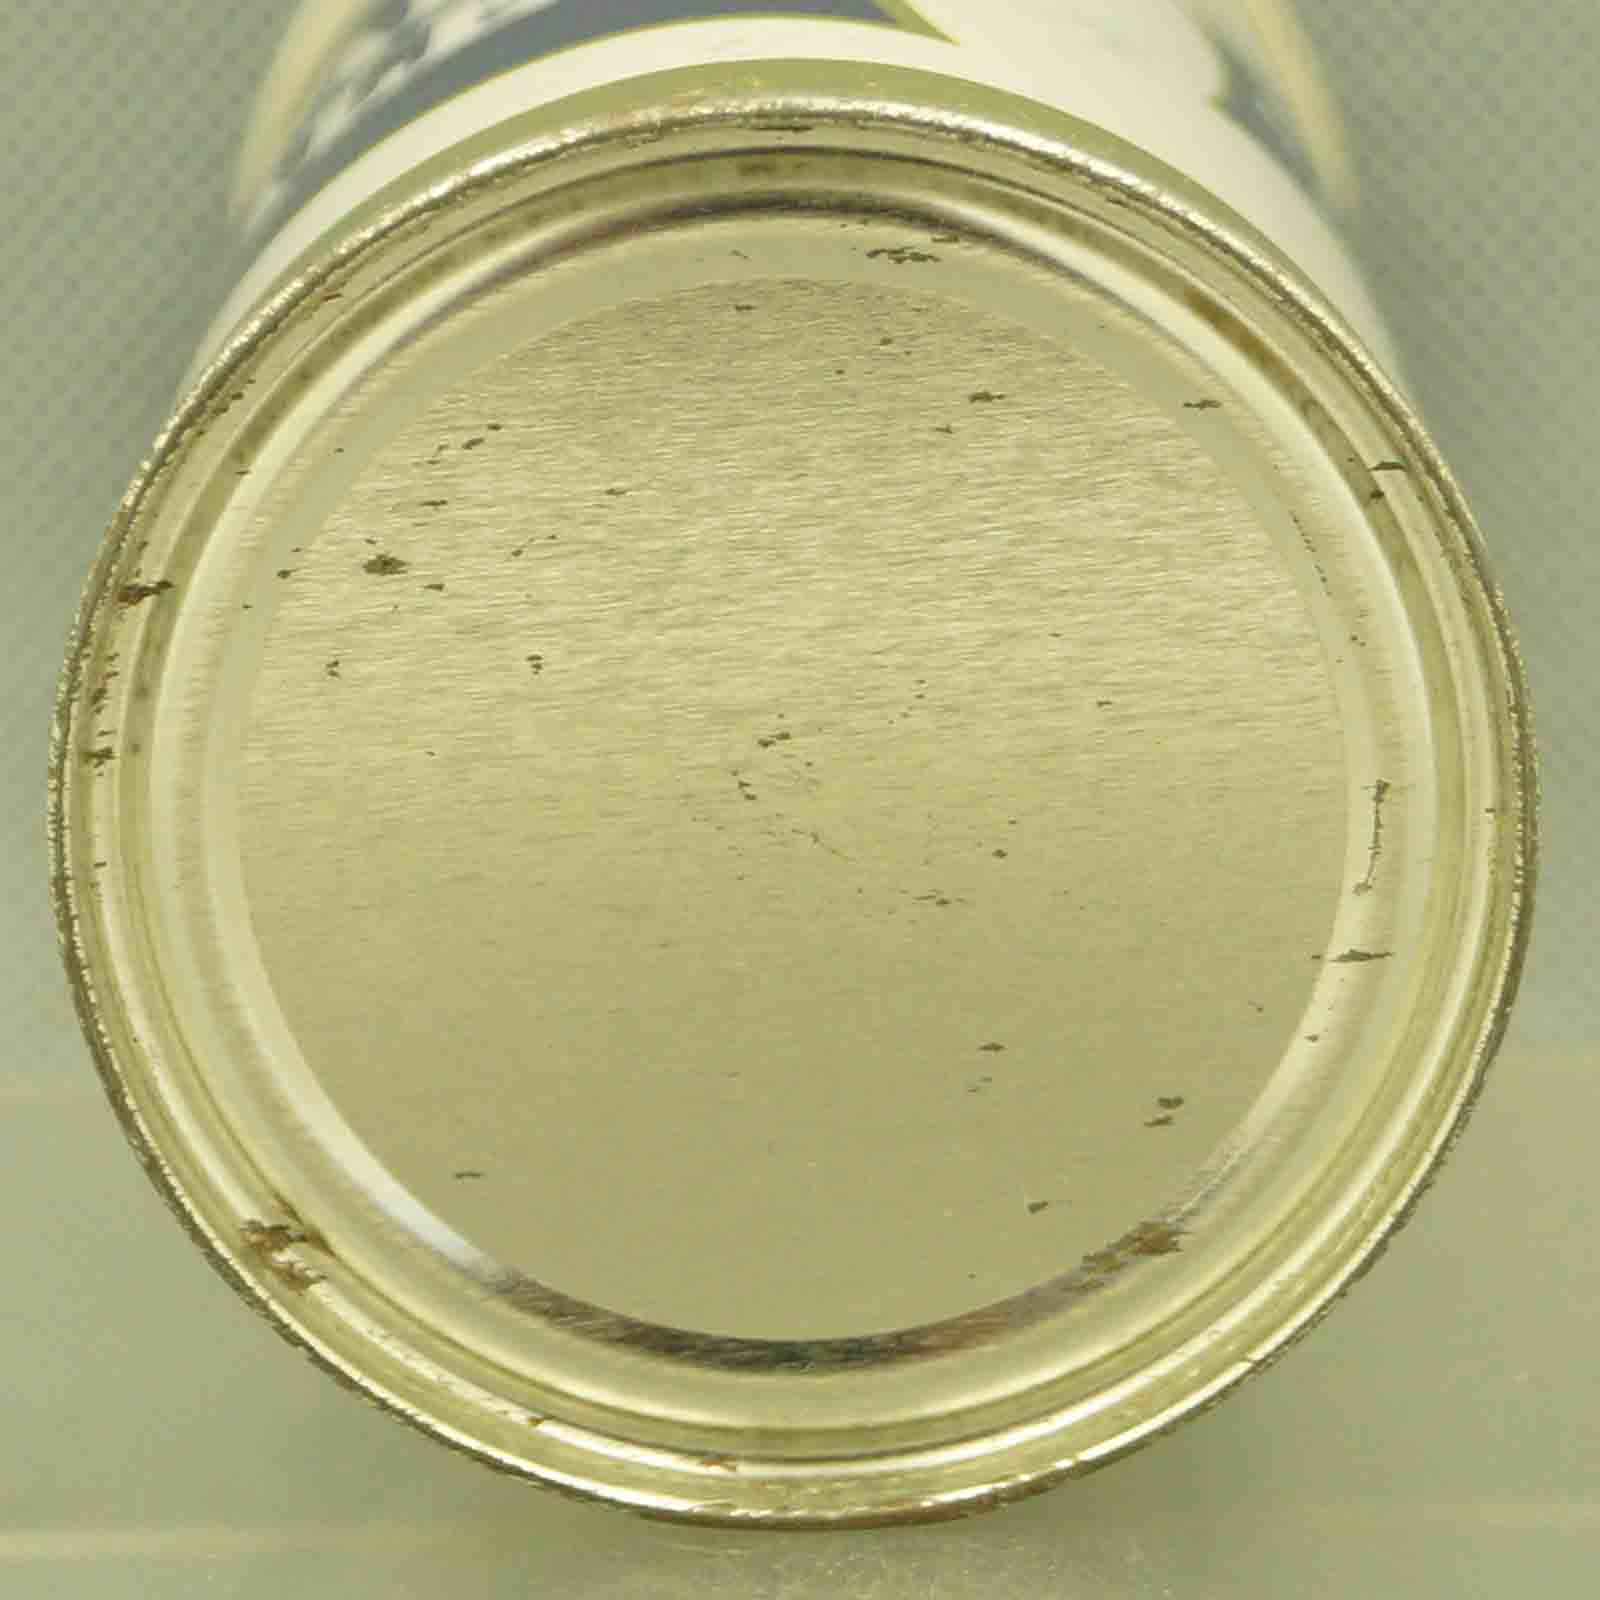 standard dry 126-7 pull tab beer can 6